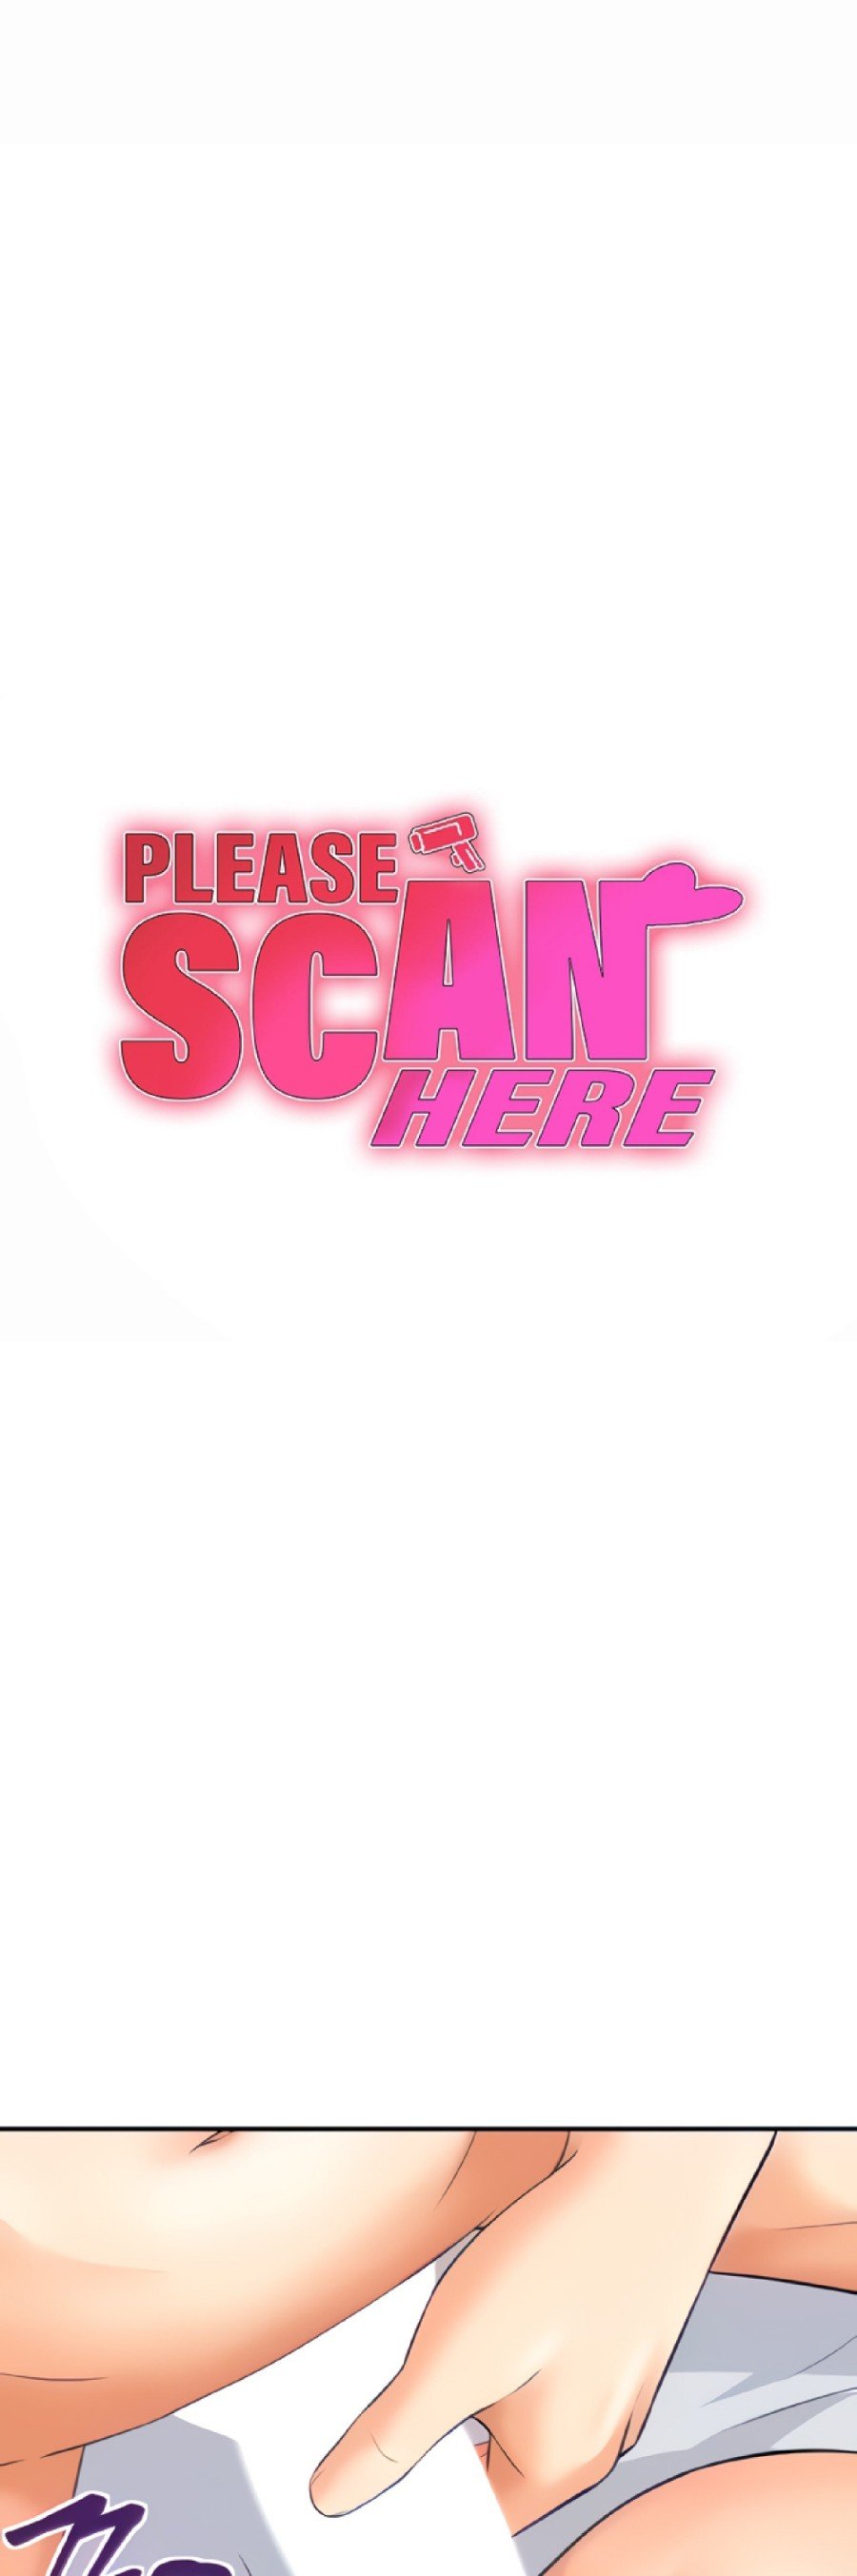 please-scan-here-raw-chap-4-0